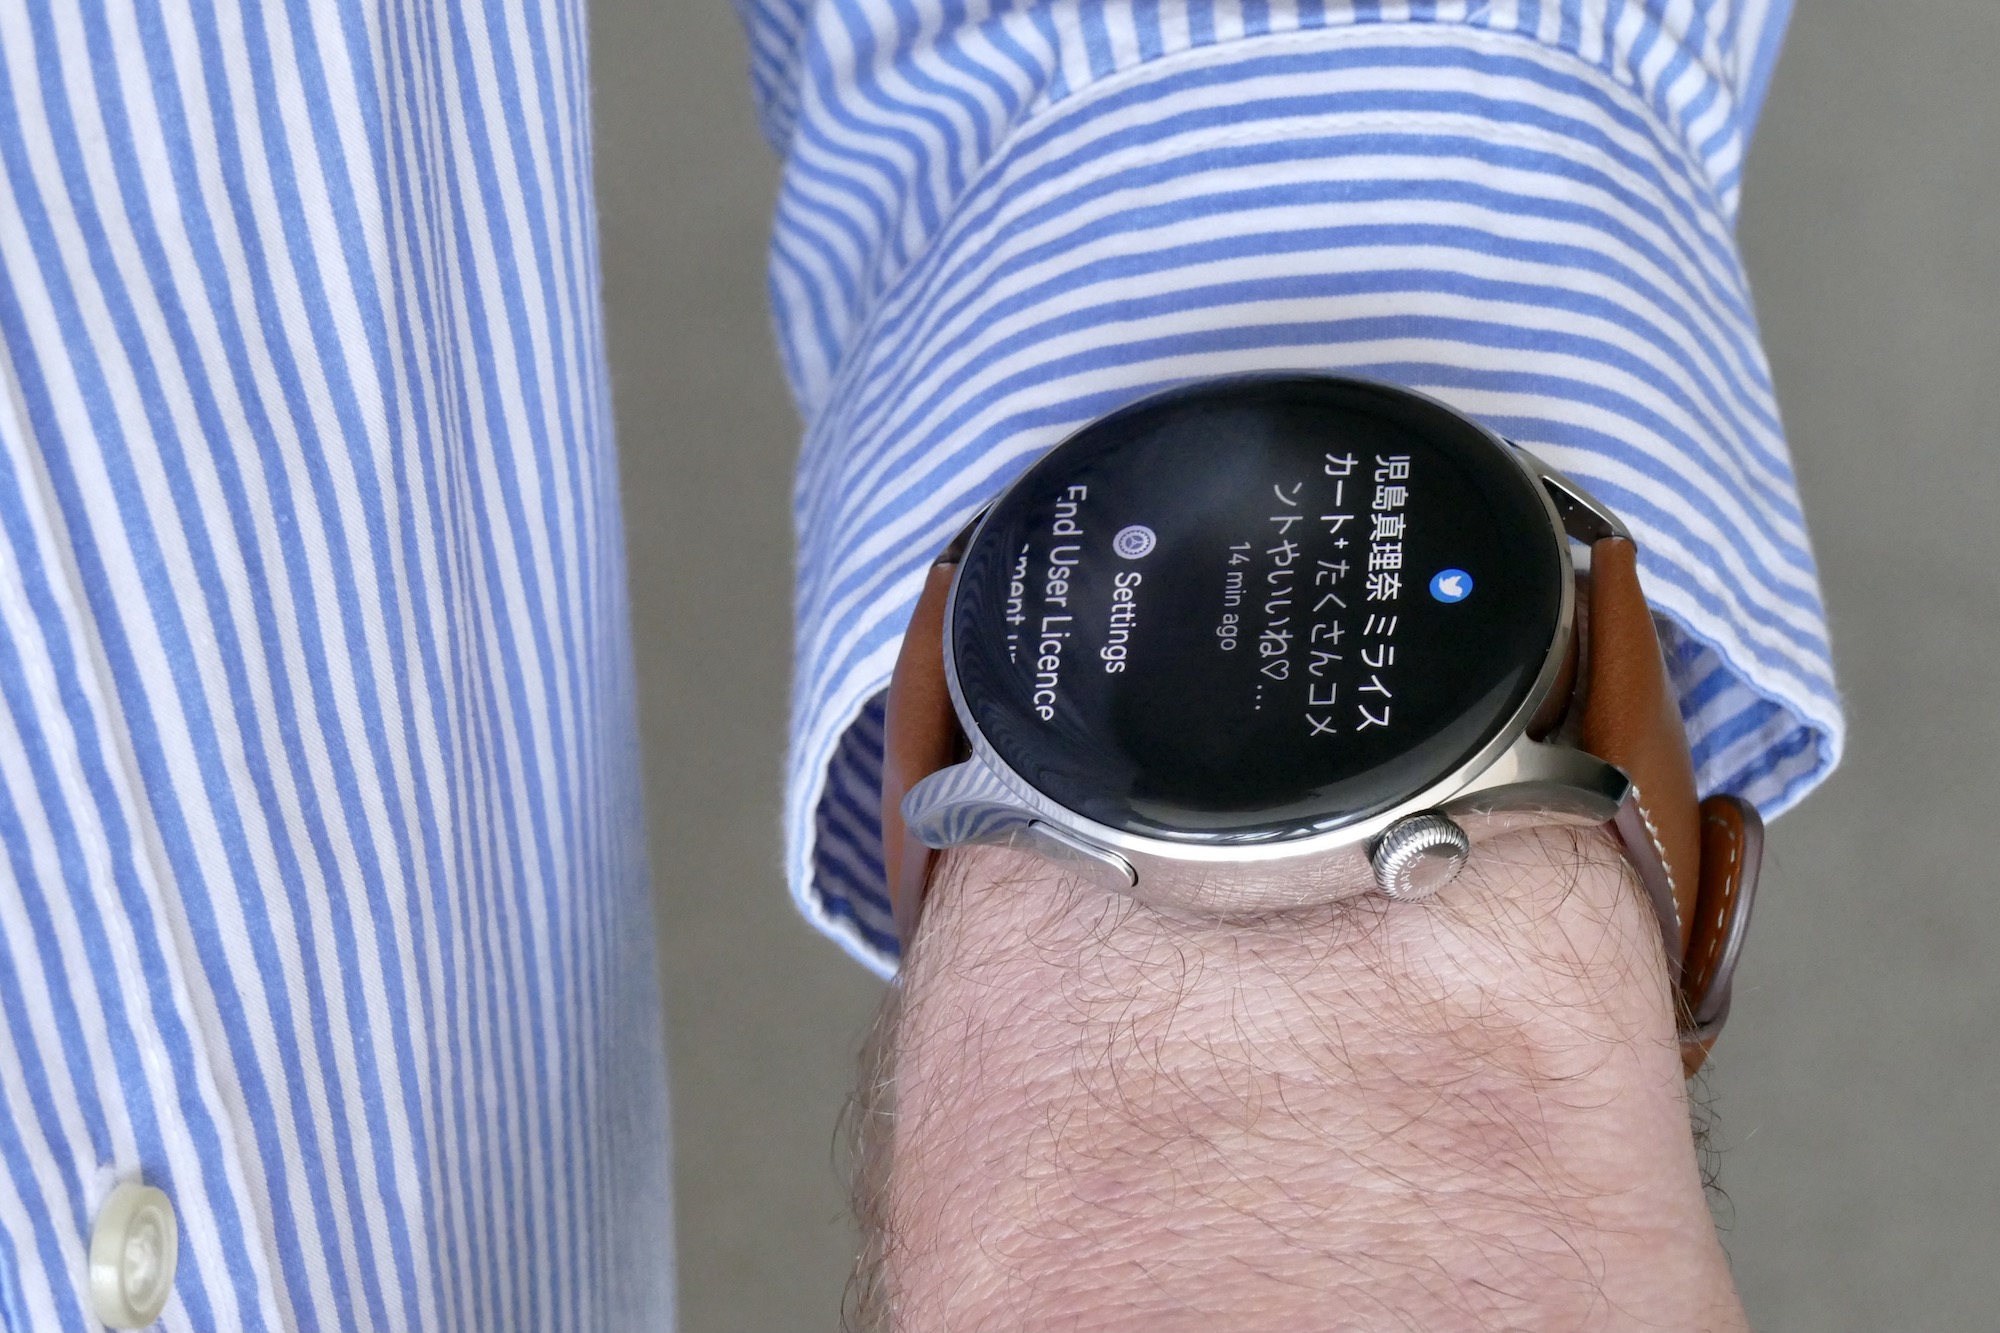 Notifications on the Huawei Watch 3